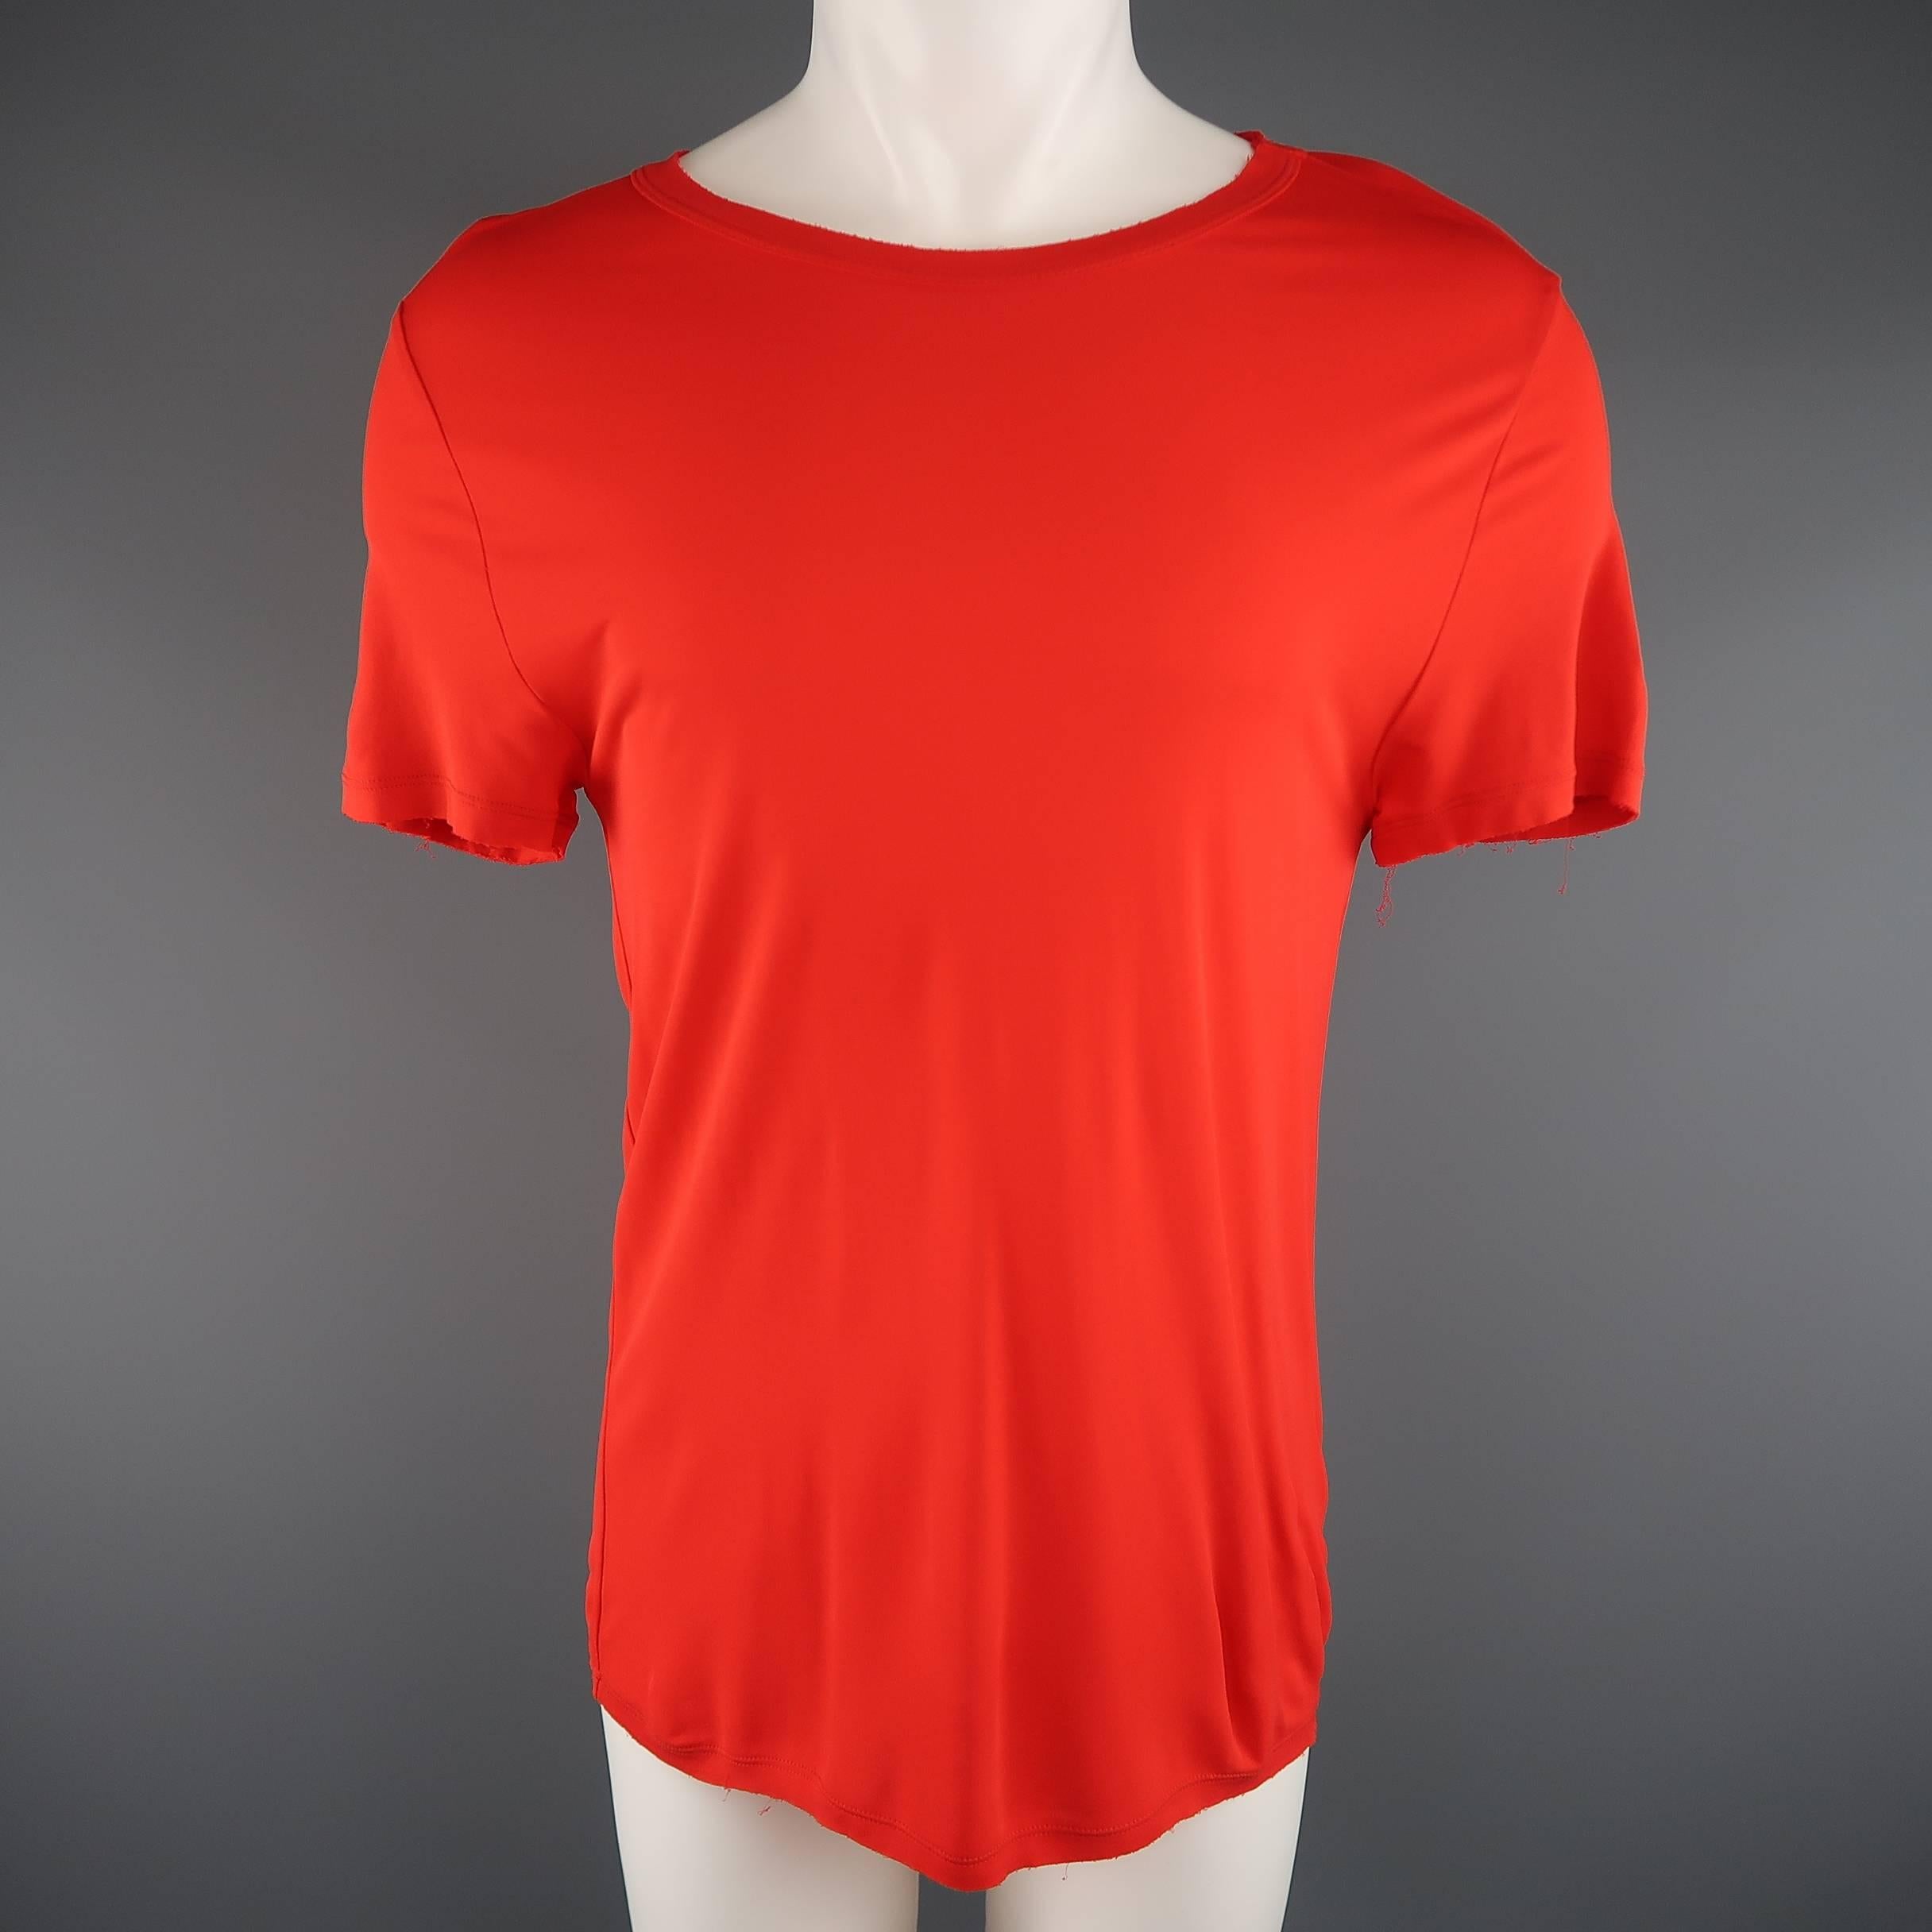 JEAN PAUL GAULTIER Soleil T-shirt comes in bright orange red opaque chiffon and features a round neckline, frayed trim, and fishnet mesh X on back. Made in Italy.
 
Excellent Pre-Owned Condition.
Marked: M
 
Measurements:
 
Shoulder: 17 in.
Chest: